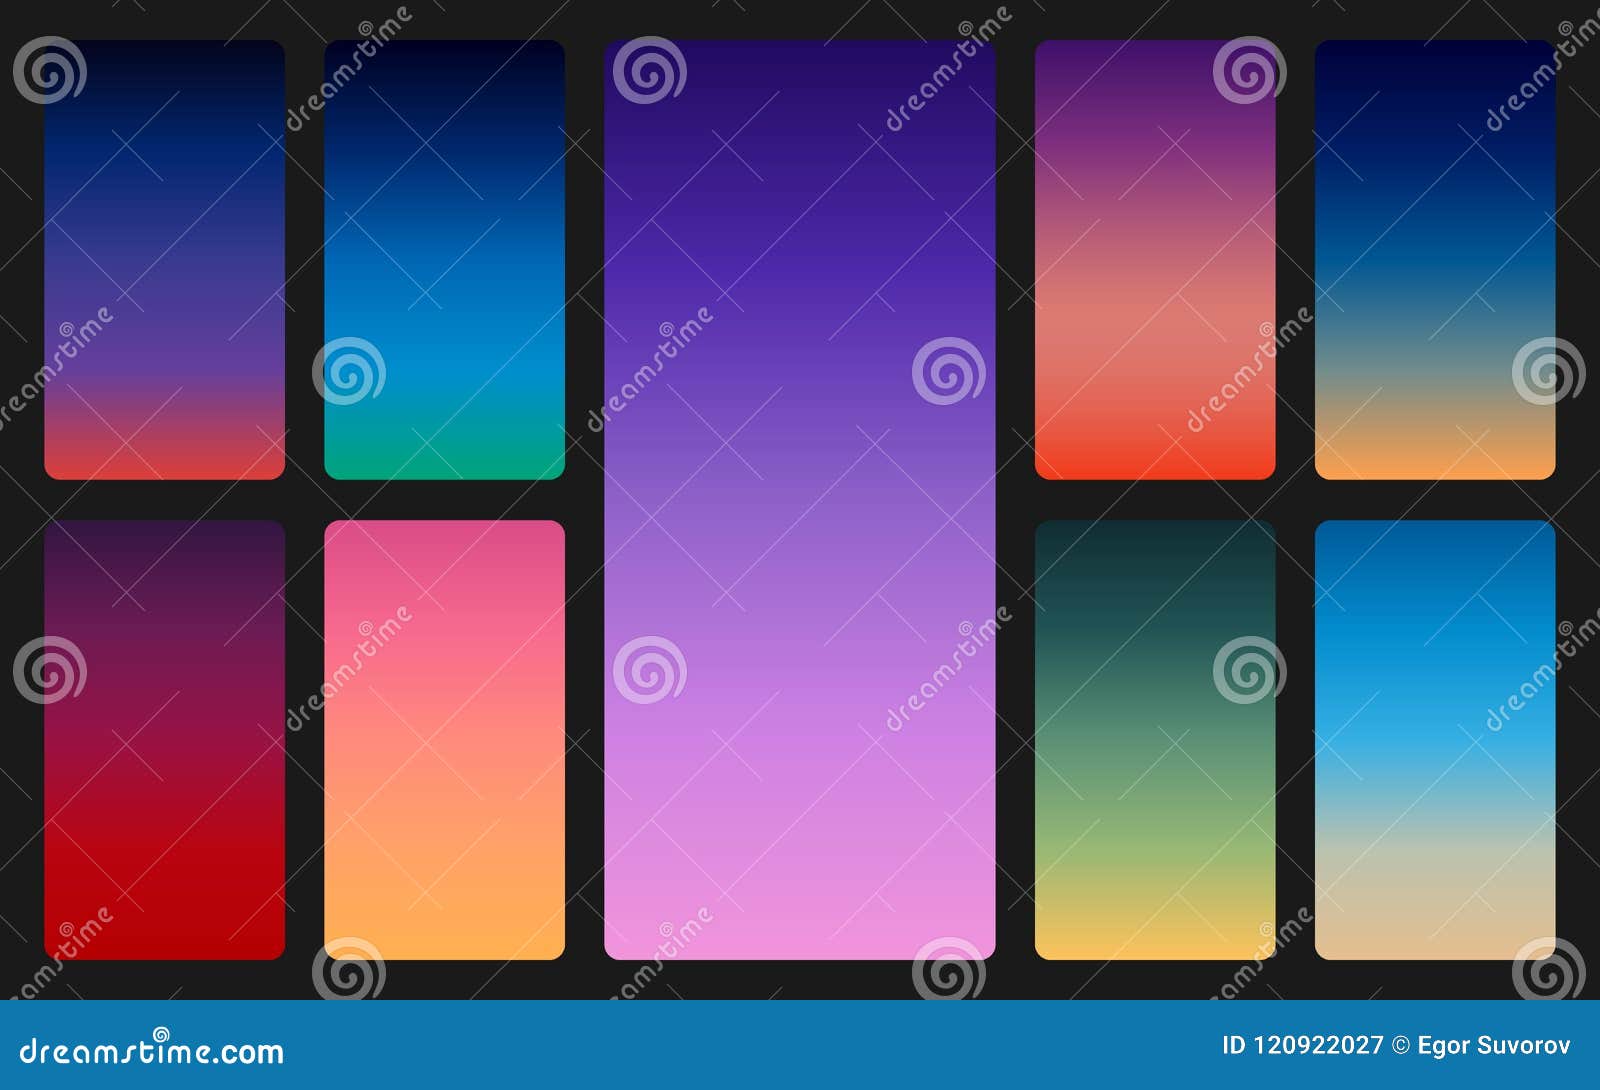 color sky background on dark. sunset and sunrise gradients set. soft colorful backdrop for mobile app. trendy abstract